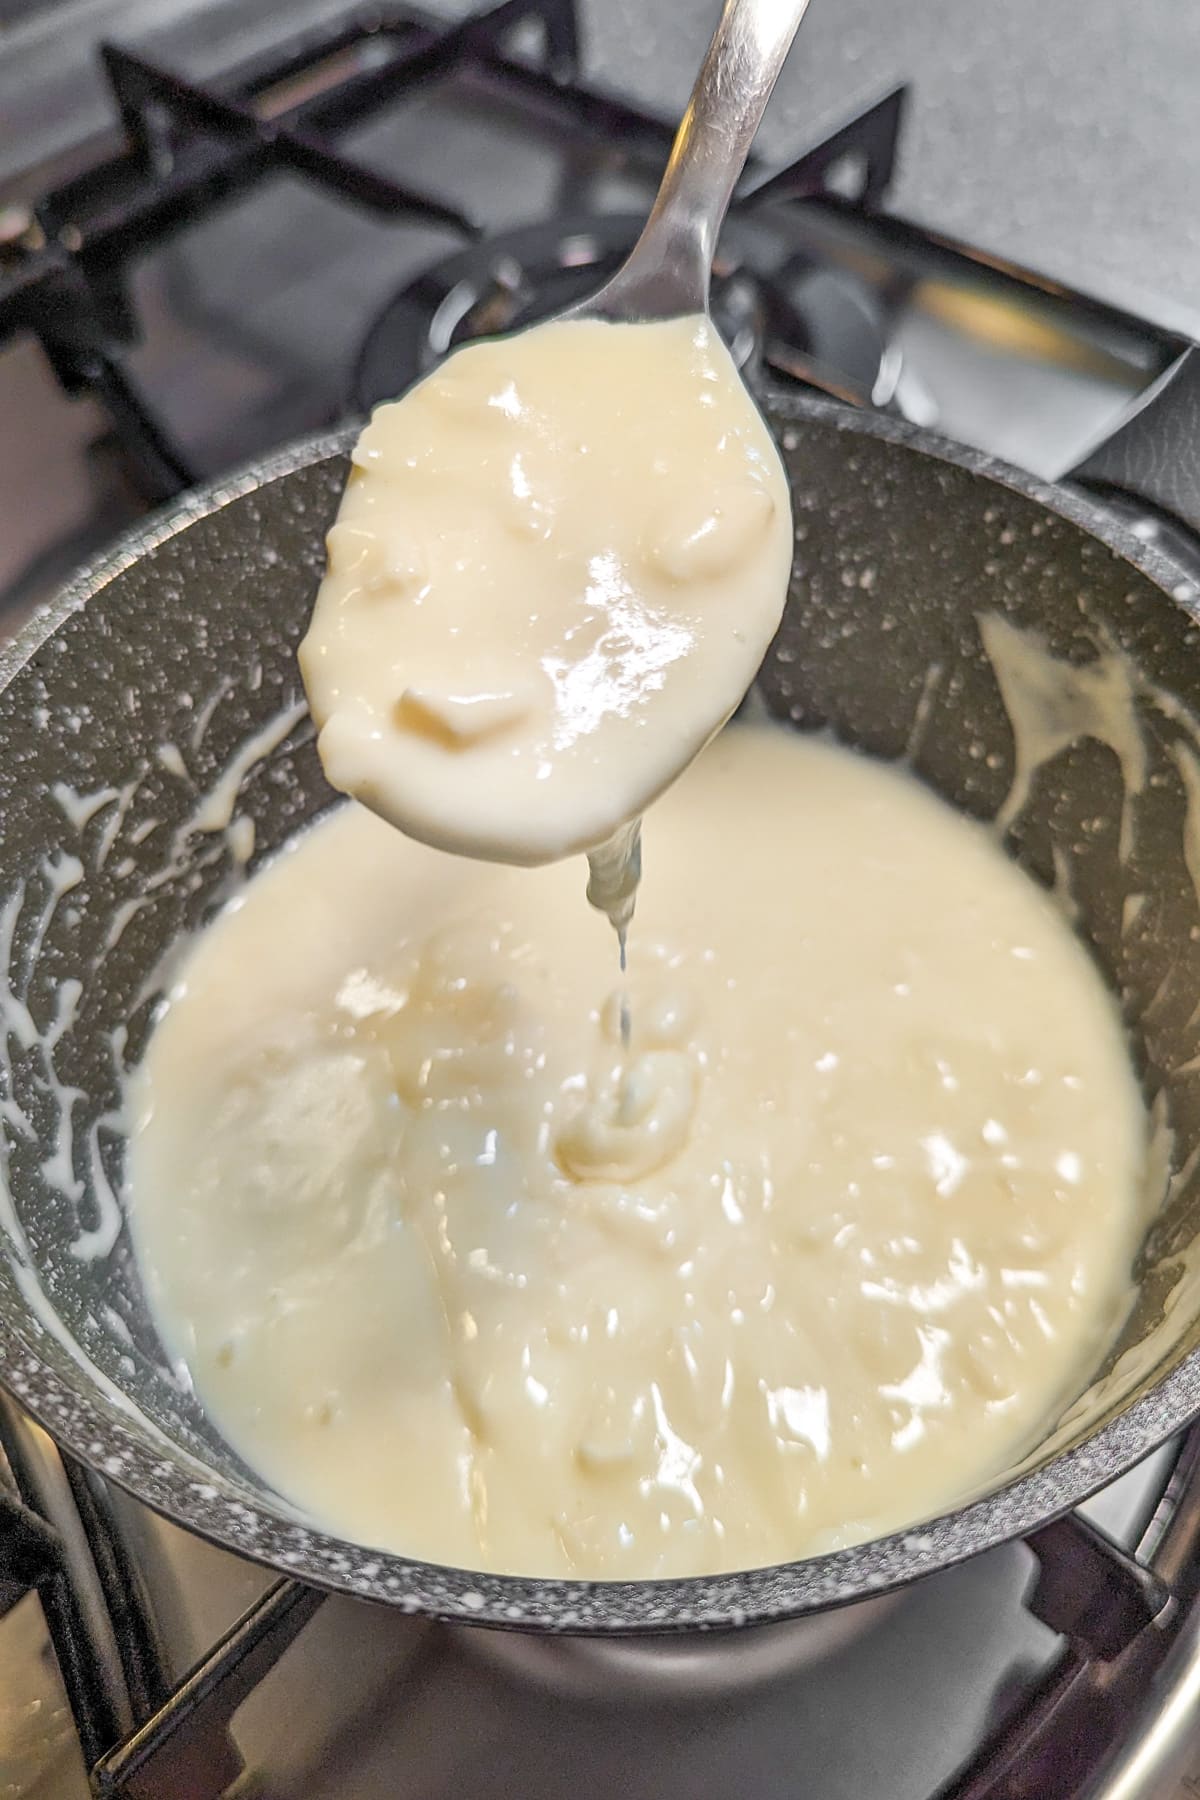 A spoon with camembert sauce over a saucepan on the stove.